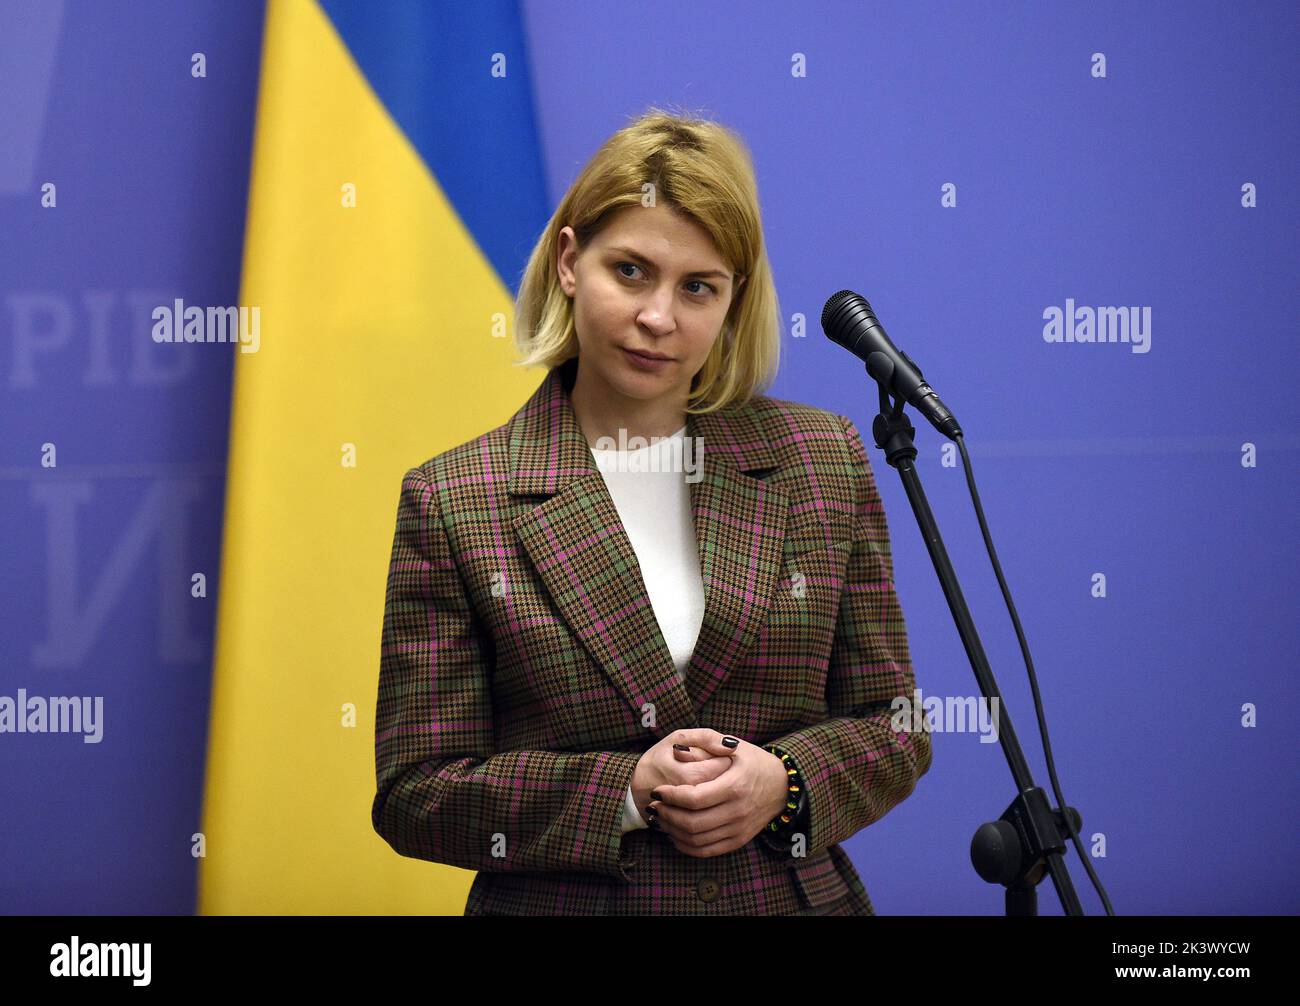 Kyiv, Ukraine. 28th Sep, 2022. KYIV, UKRAINE - SEPTEMBER 28, 2022 - Deputy Prime Minister for European and Euro-Atlantic Integration of Ukraine Olha Stefanishyna is seen during a joint press briefing with European Commissioner for Neighbourhood and Enlargement from Hungary Oliver Varhelyi, Kyiv, capital of Ukraine. Credit: Ukrinform/Alamy Live News Stock Photo